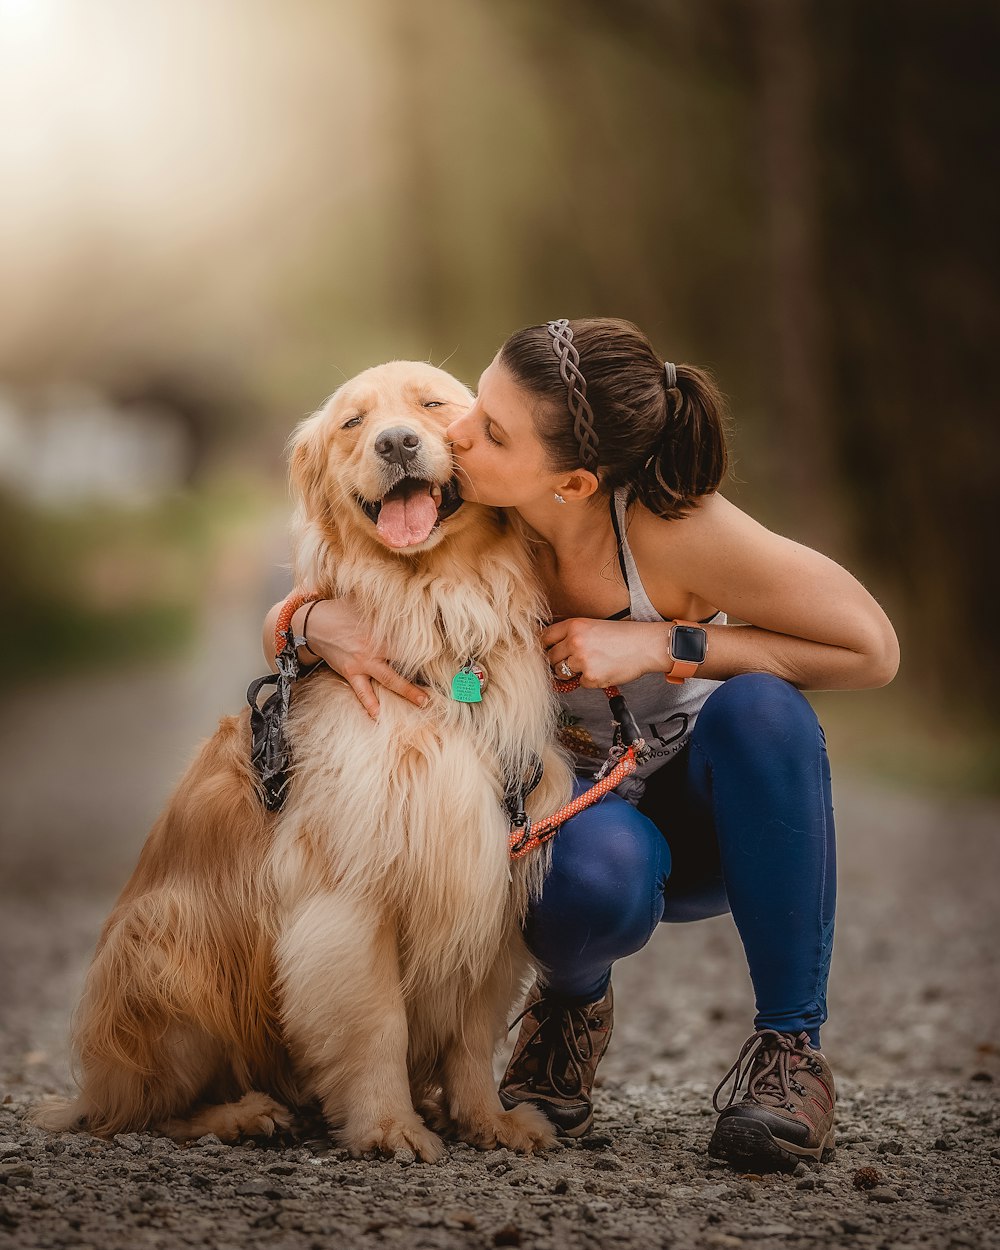 American Girl X Video - 750+ Dog And Girl Pictures | Download Free Images on Unsplash